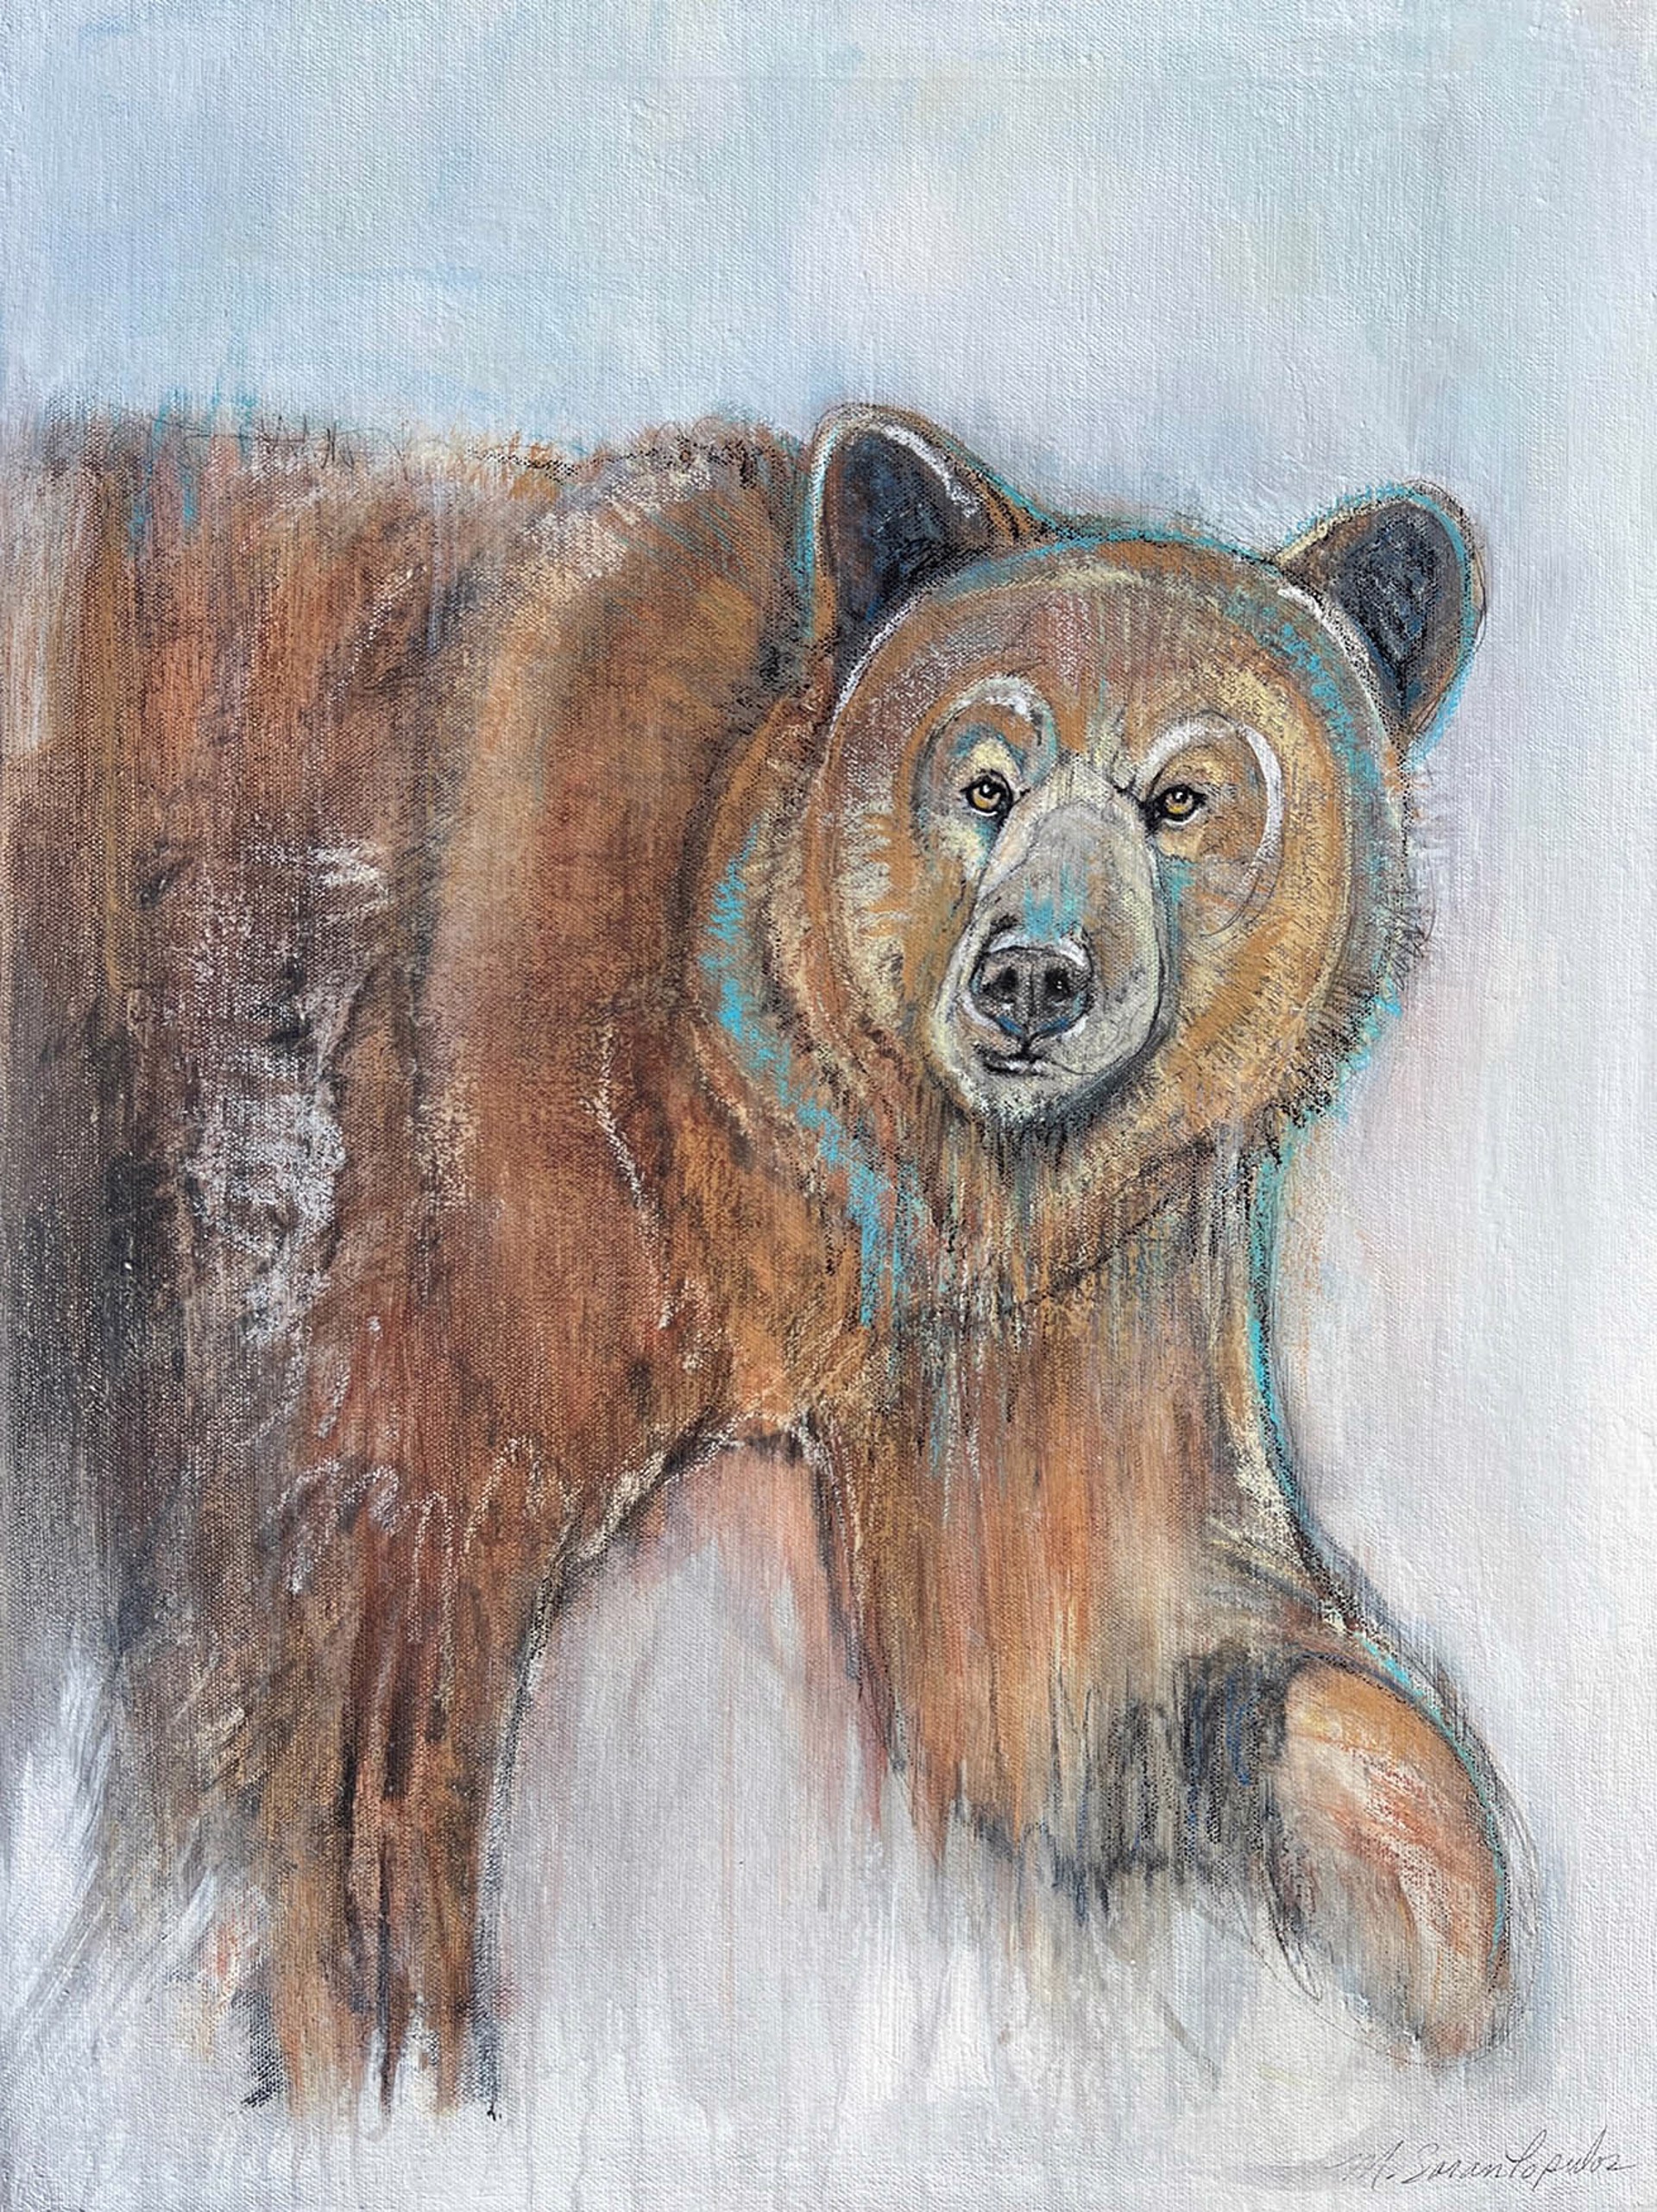 Original Mixed Media Painting Featuring A Brown Grizzly Bear With Turquoise Face Markings Sketched Onto Blue And Gray Background